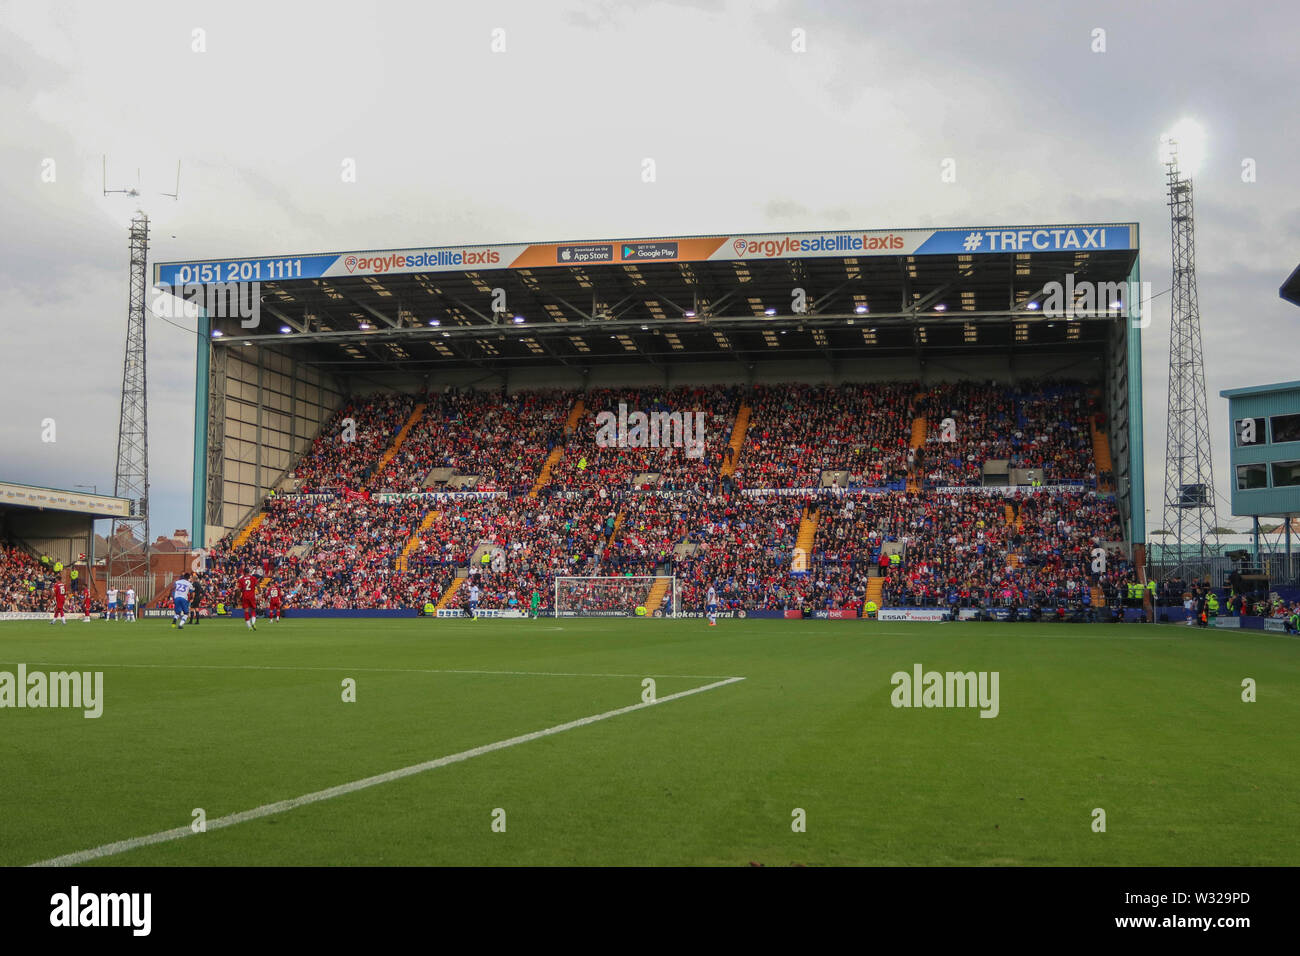 Birkenhead, UK. 11th July, 2019. A general view of Prenton Park's Kop Stand during the Pre-Season Friendly match between Tranmere Rovers and Liverpool at Prenton Park on July 11th 2019 in Birkenhead, England. (Photo by Richard Ault/phcimages.com) Credit: PHC Images/Alamy Live News Stock Photo